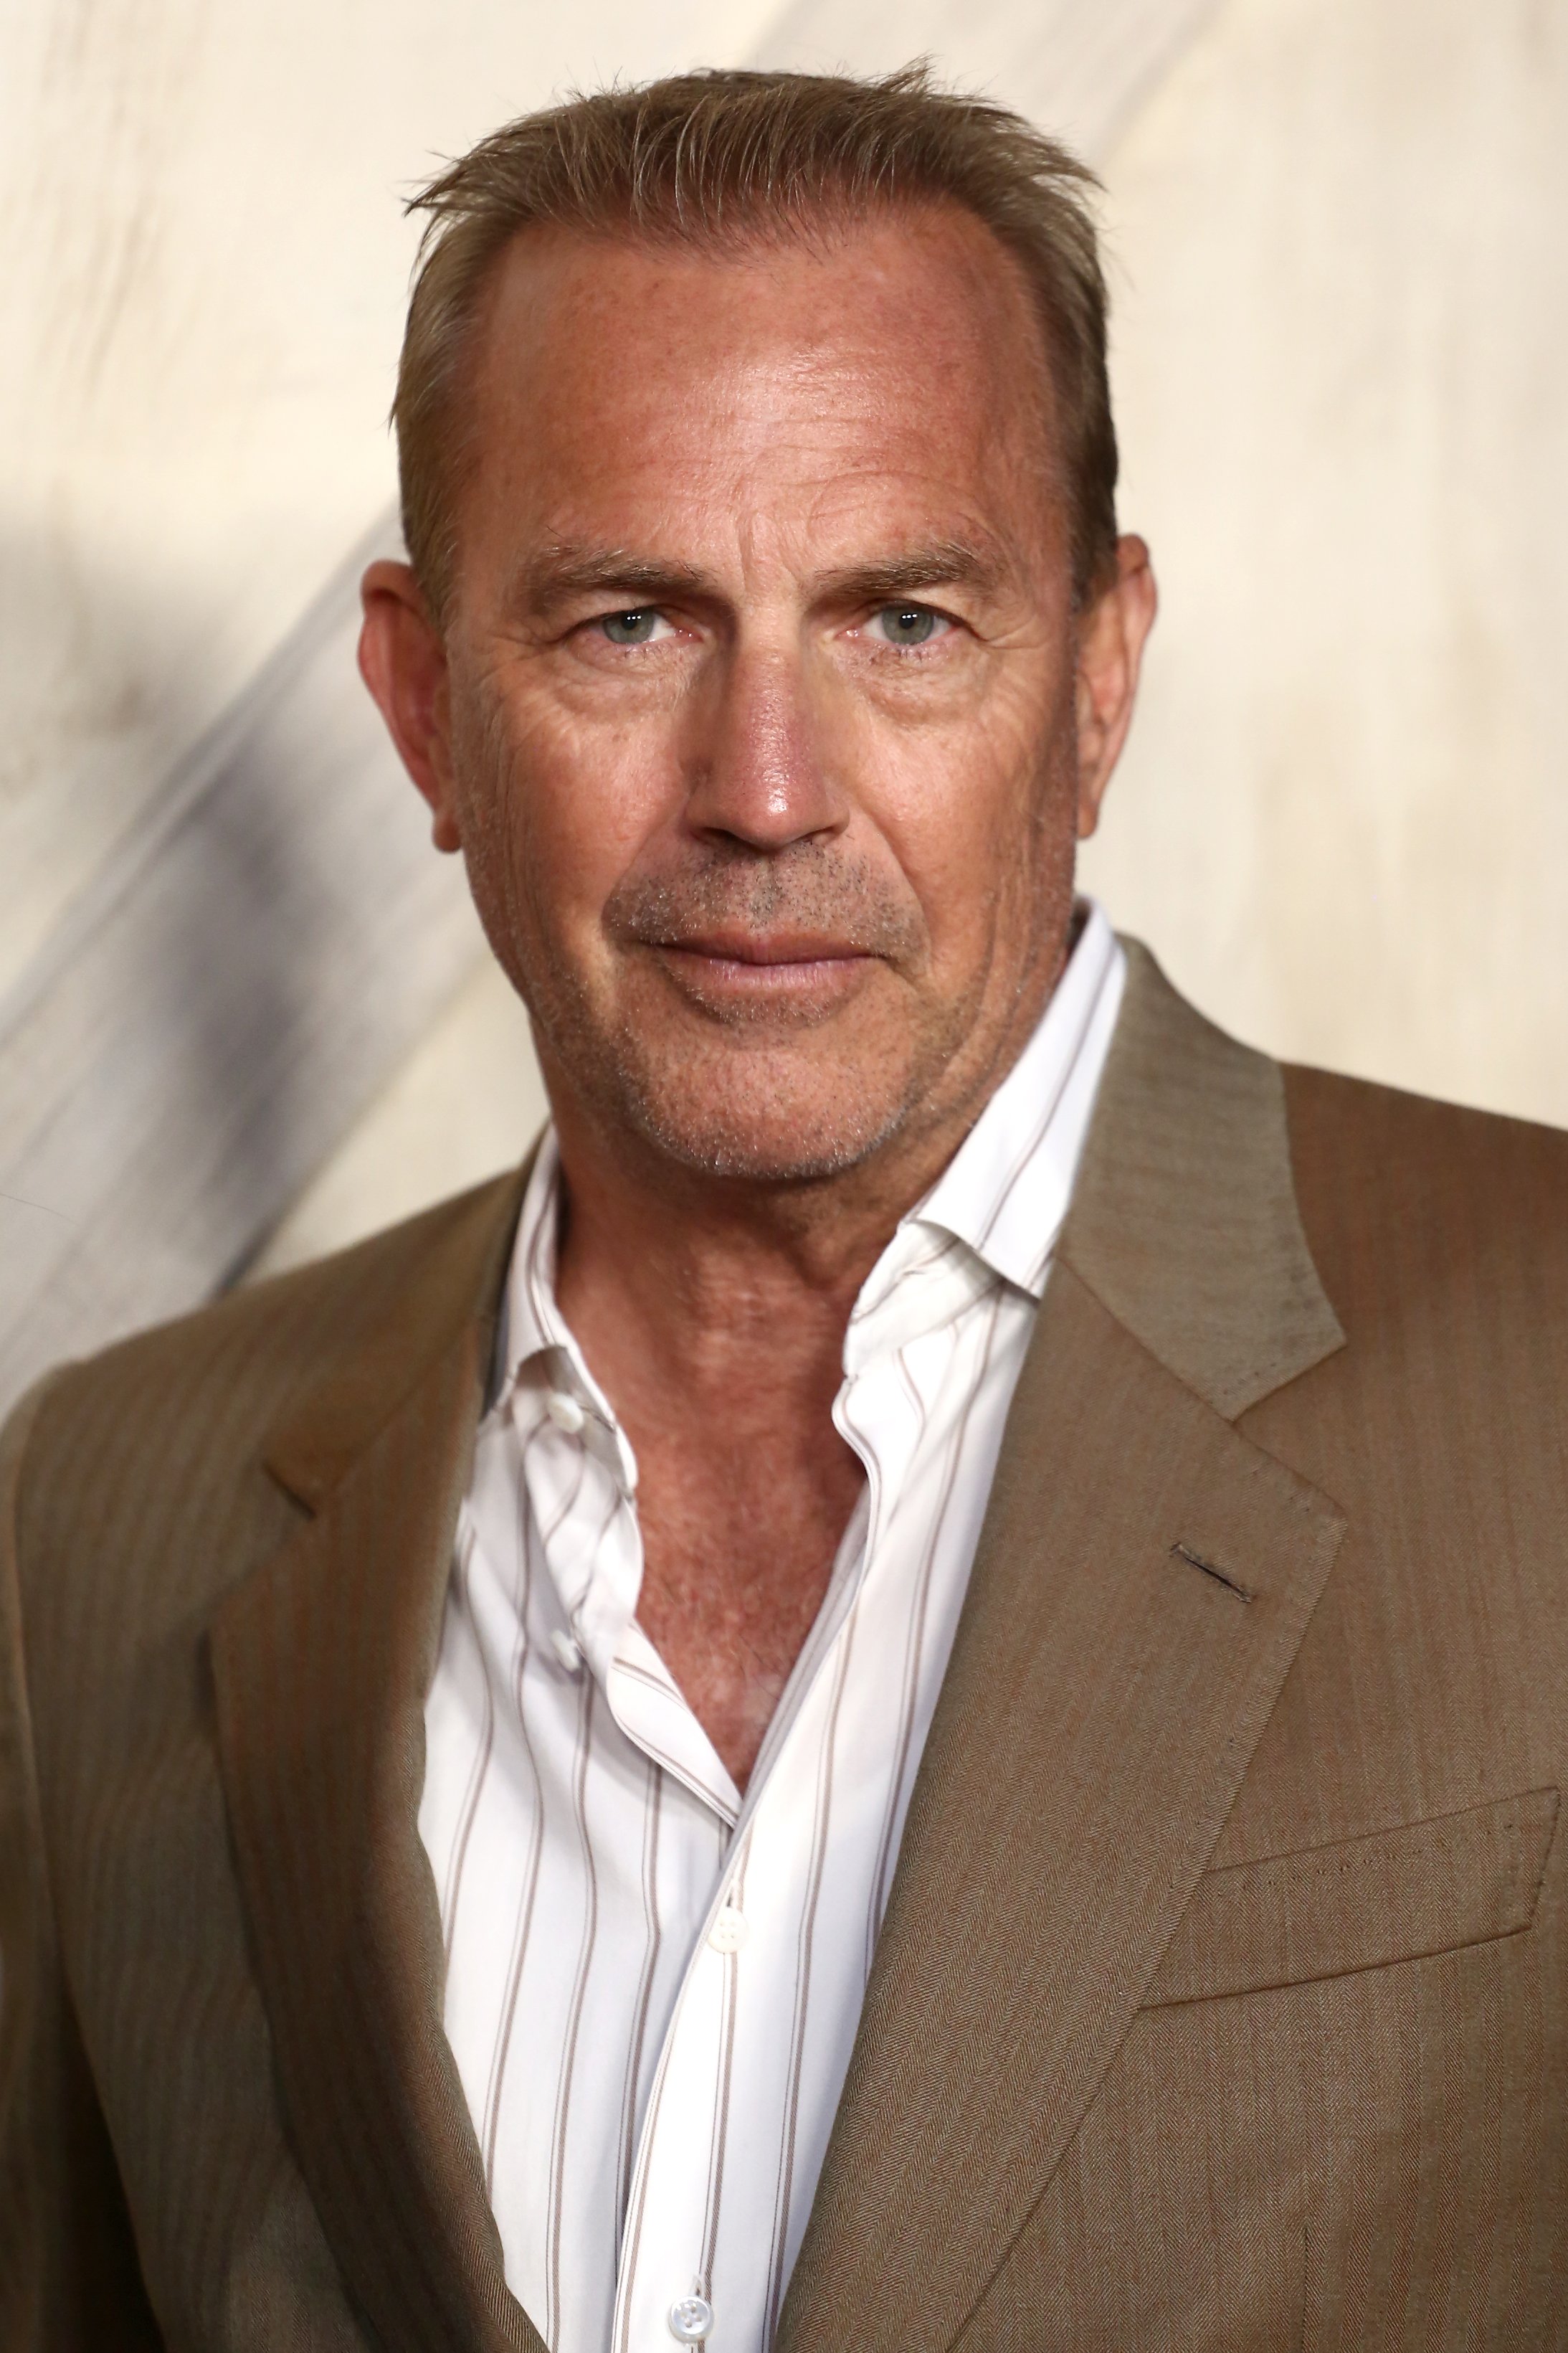 Kevin Costner attends the Premiere Party For Paramount Network's "Yellowstone" Season 2 at Lombardi House on May 30, 2019 in Los Angeles, California | Source: Getty Images 